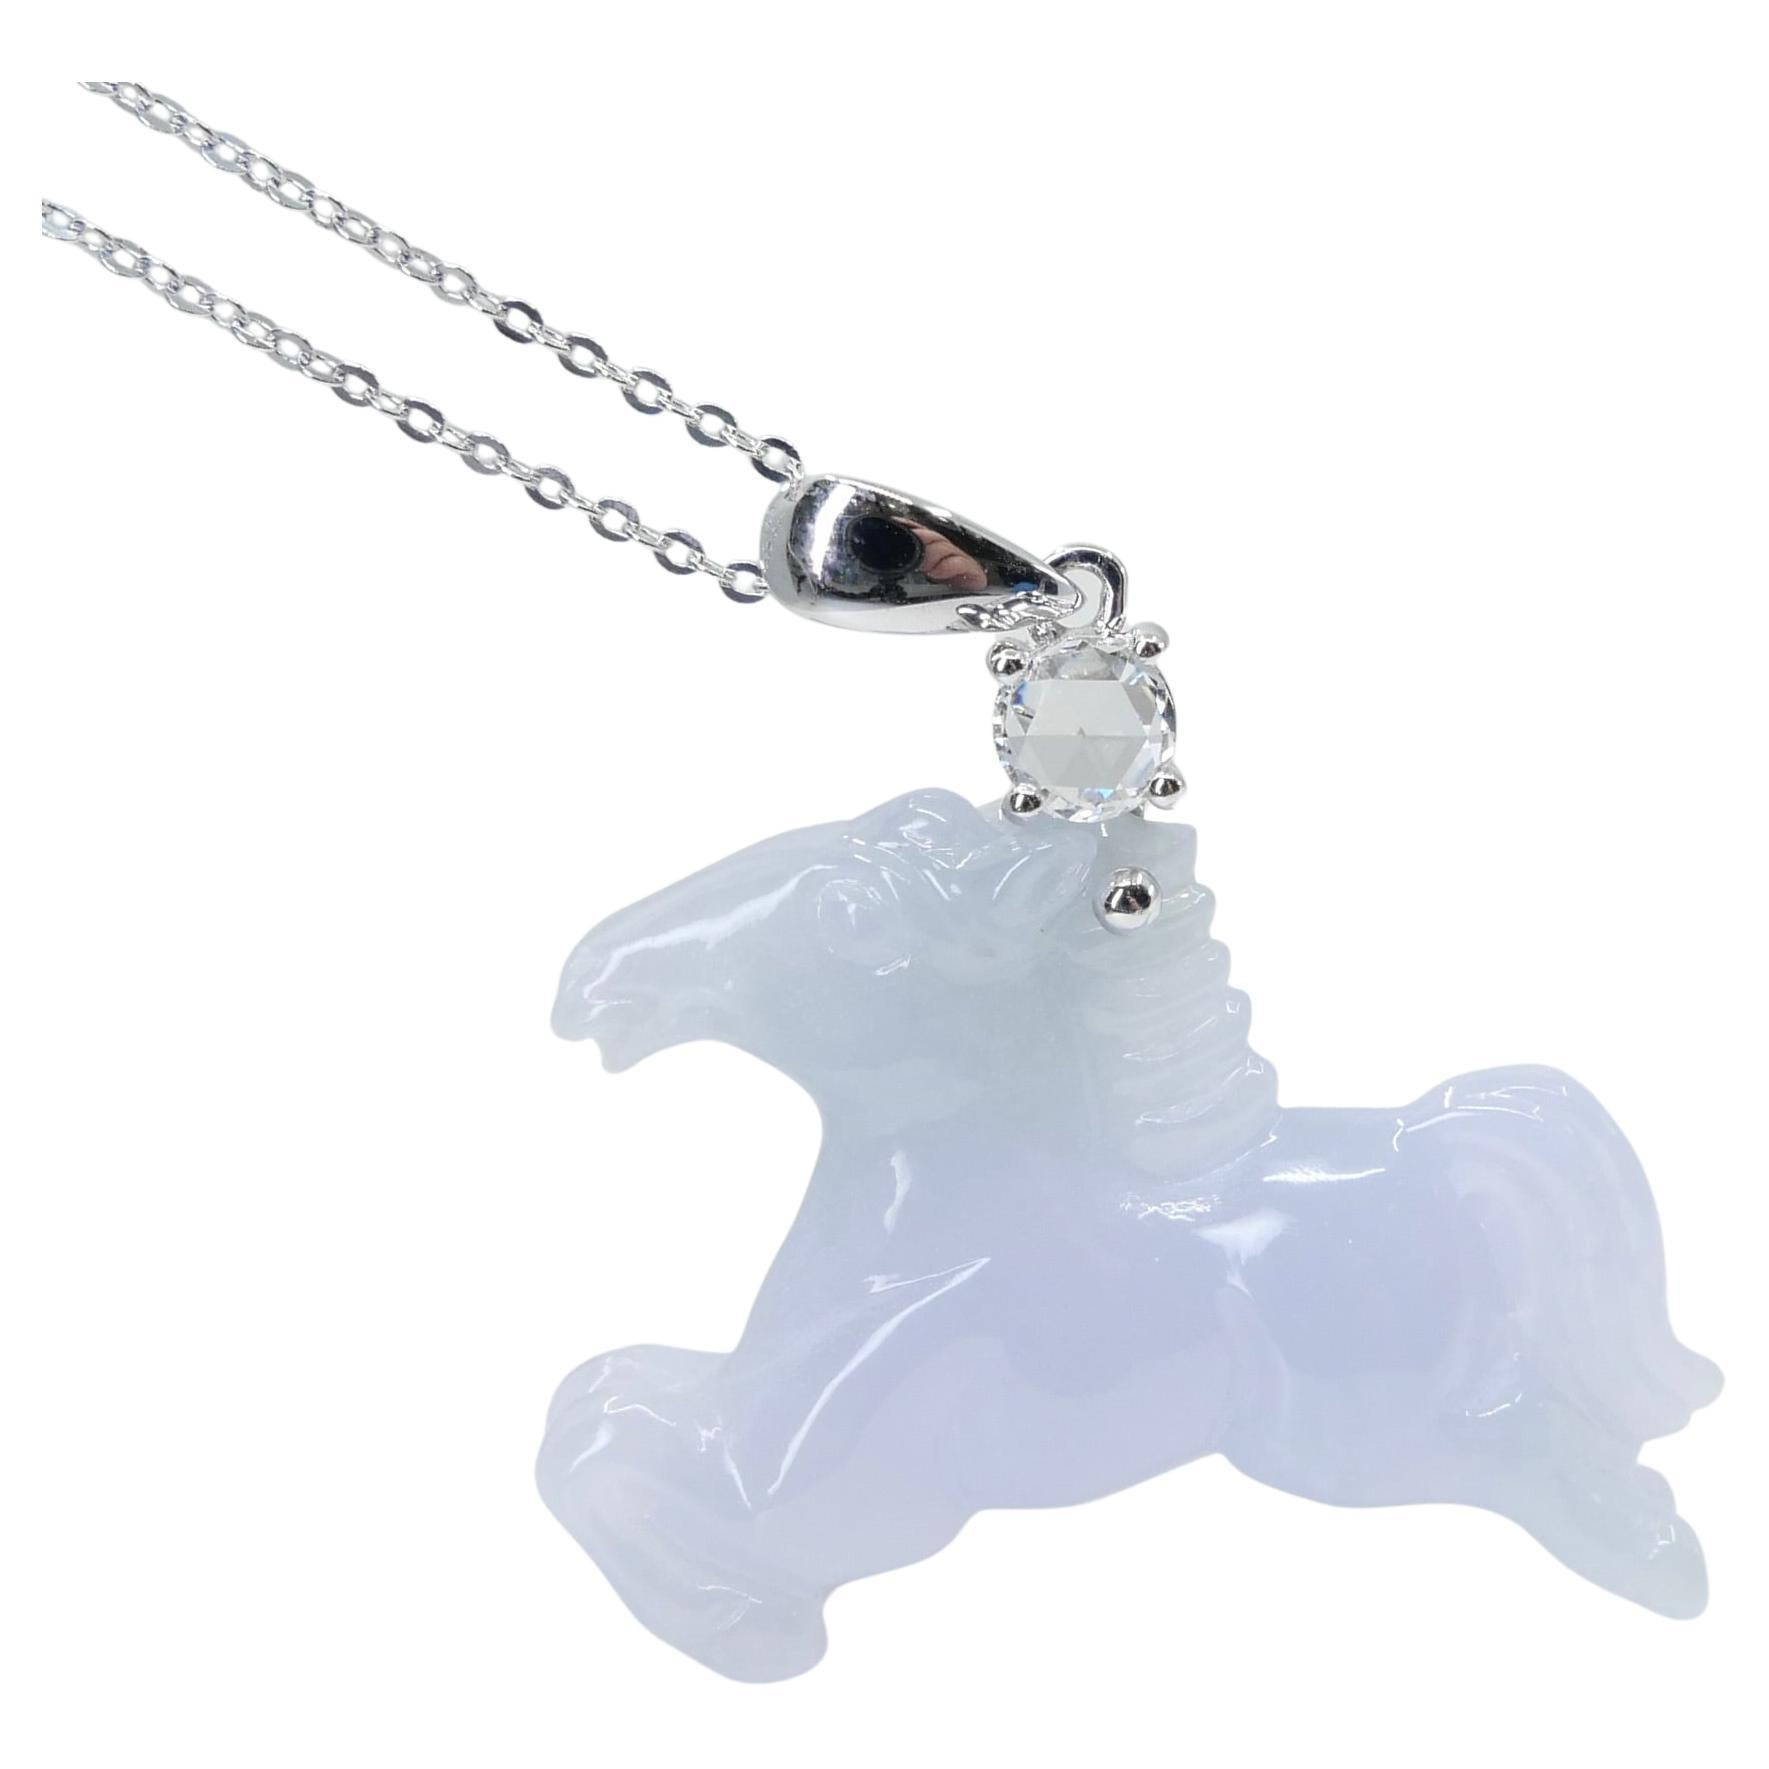 Certified 27.64cts Jade & Diamond Horse Pendant, for Equestrians & Horse Lovers